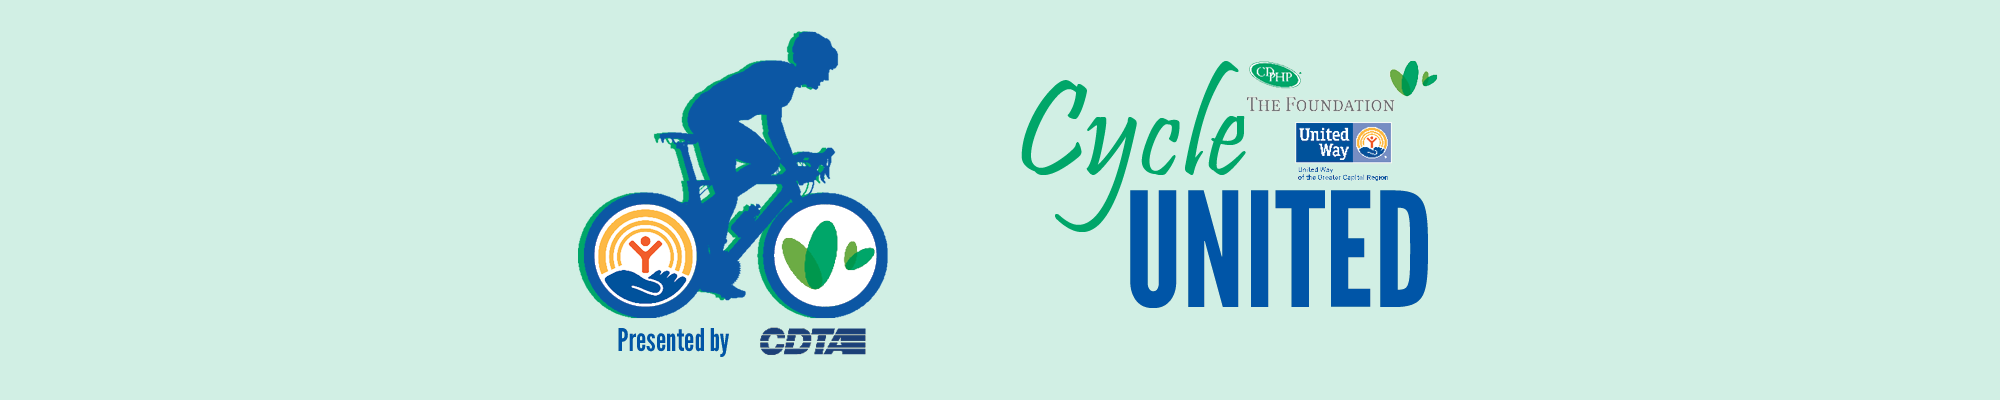 Cycle United